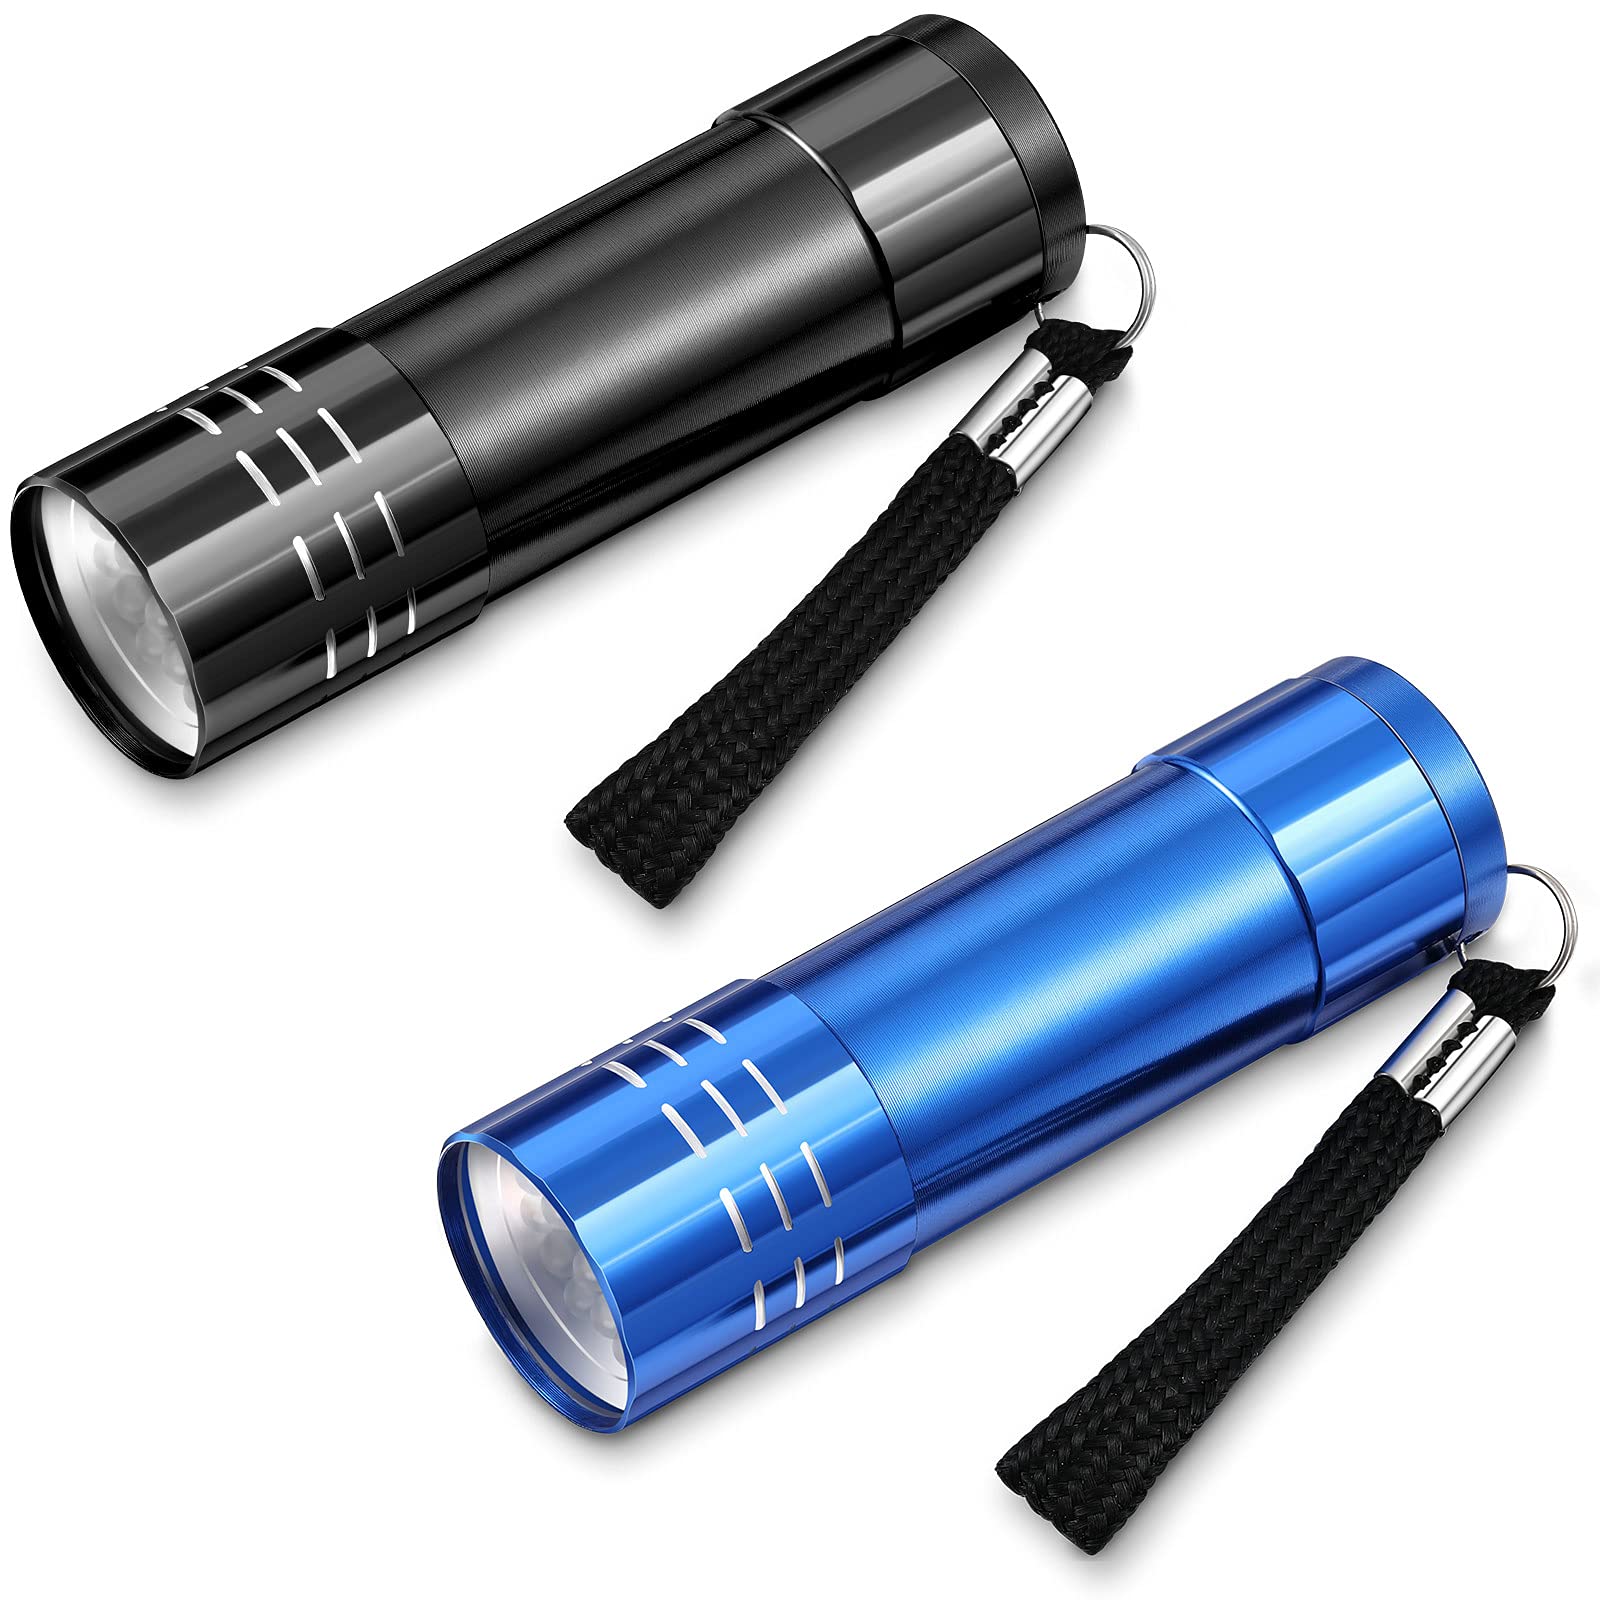 2 Pieces Mini Pocket Torch Ultra Bright LED Flashlight 4 Inch Waterproof Torch Light Small Mini Flashlight Pen for Camping, Outdoor, Emergency, Everyday Flashlights (Battery Not Included)